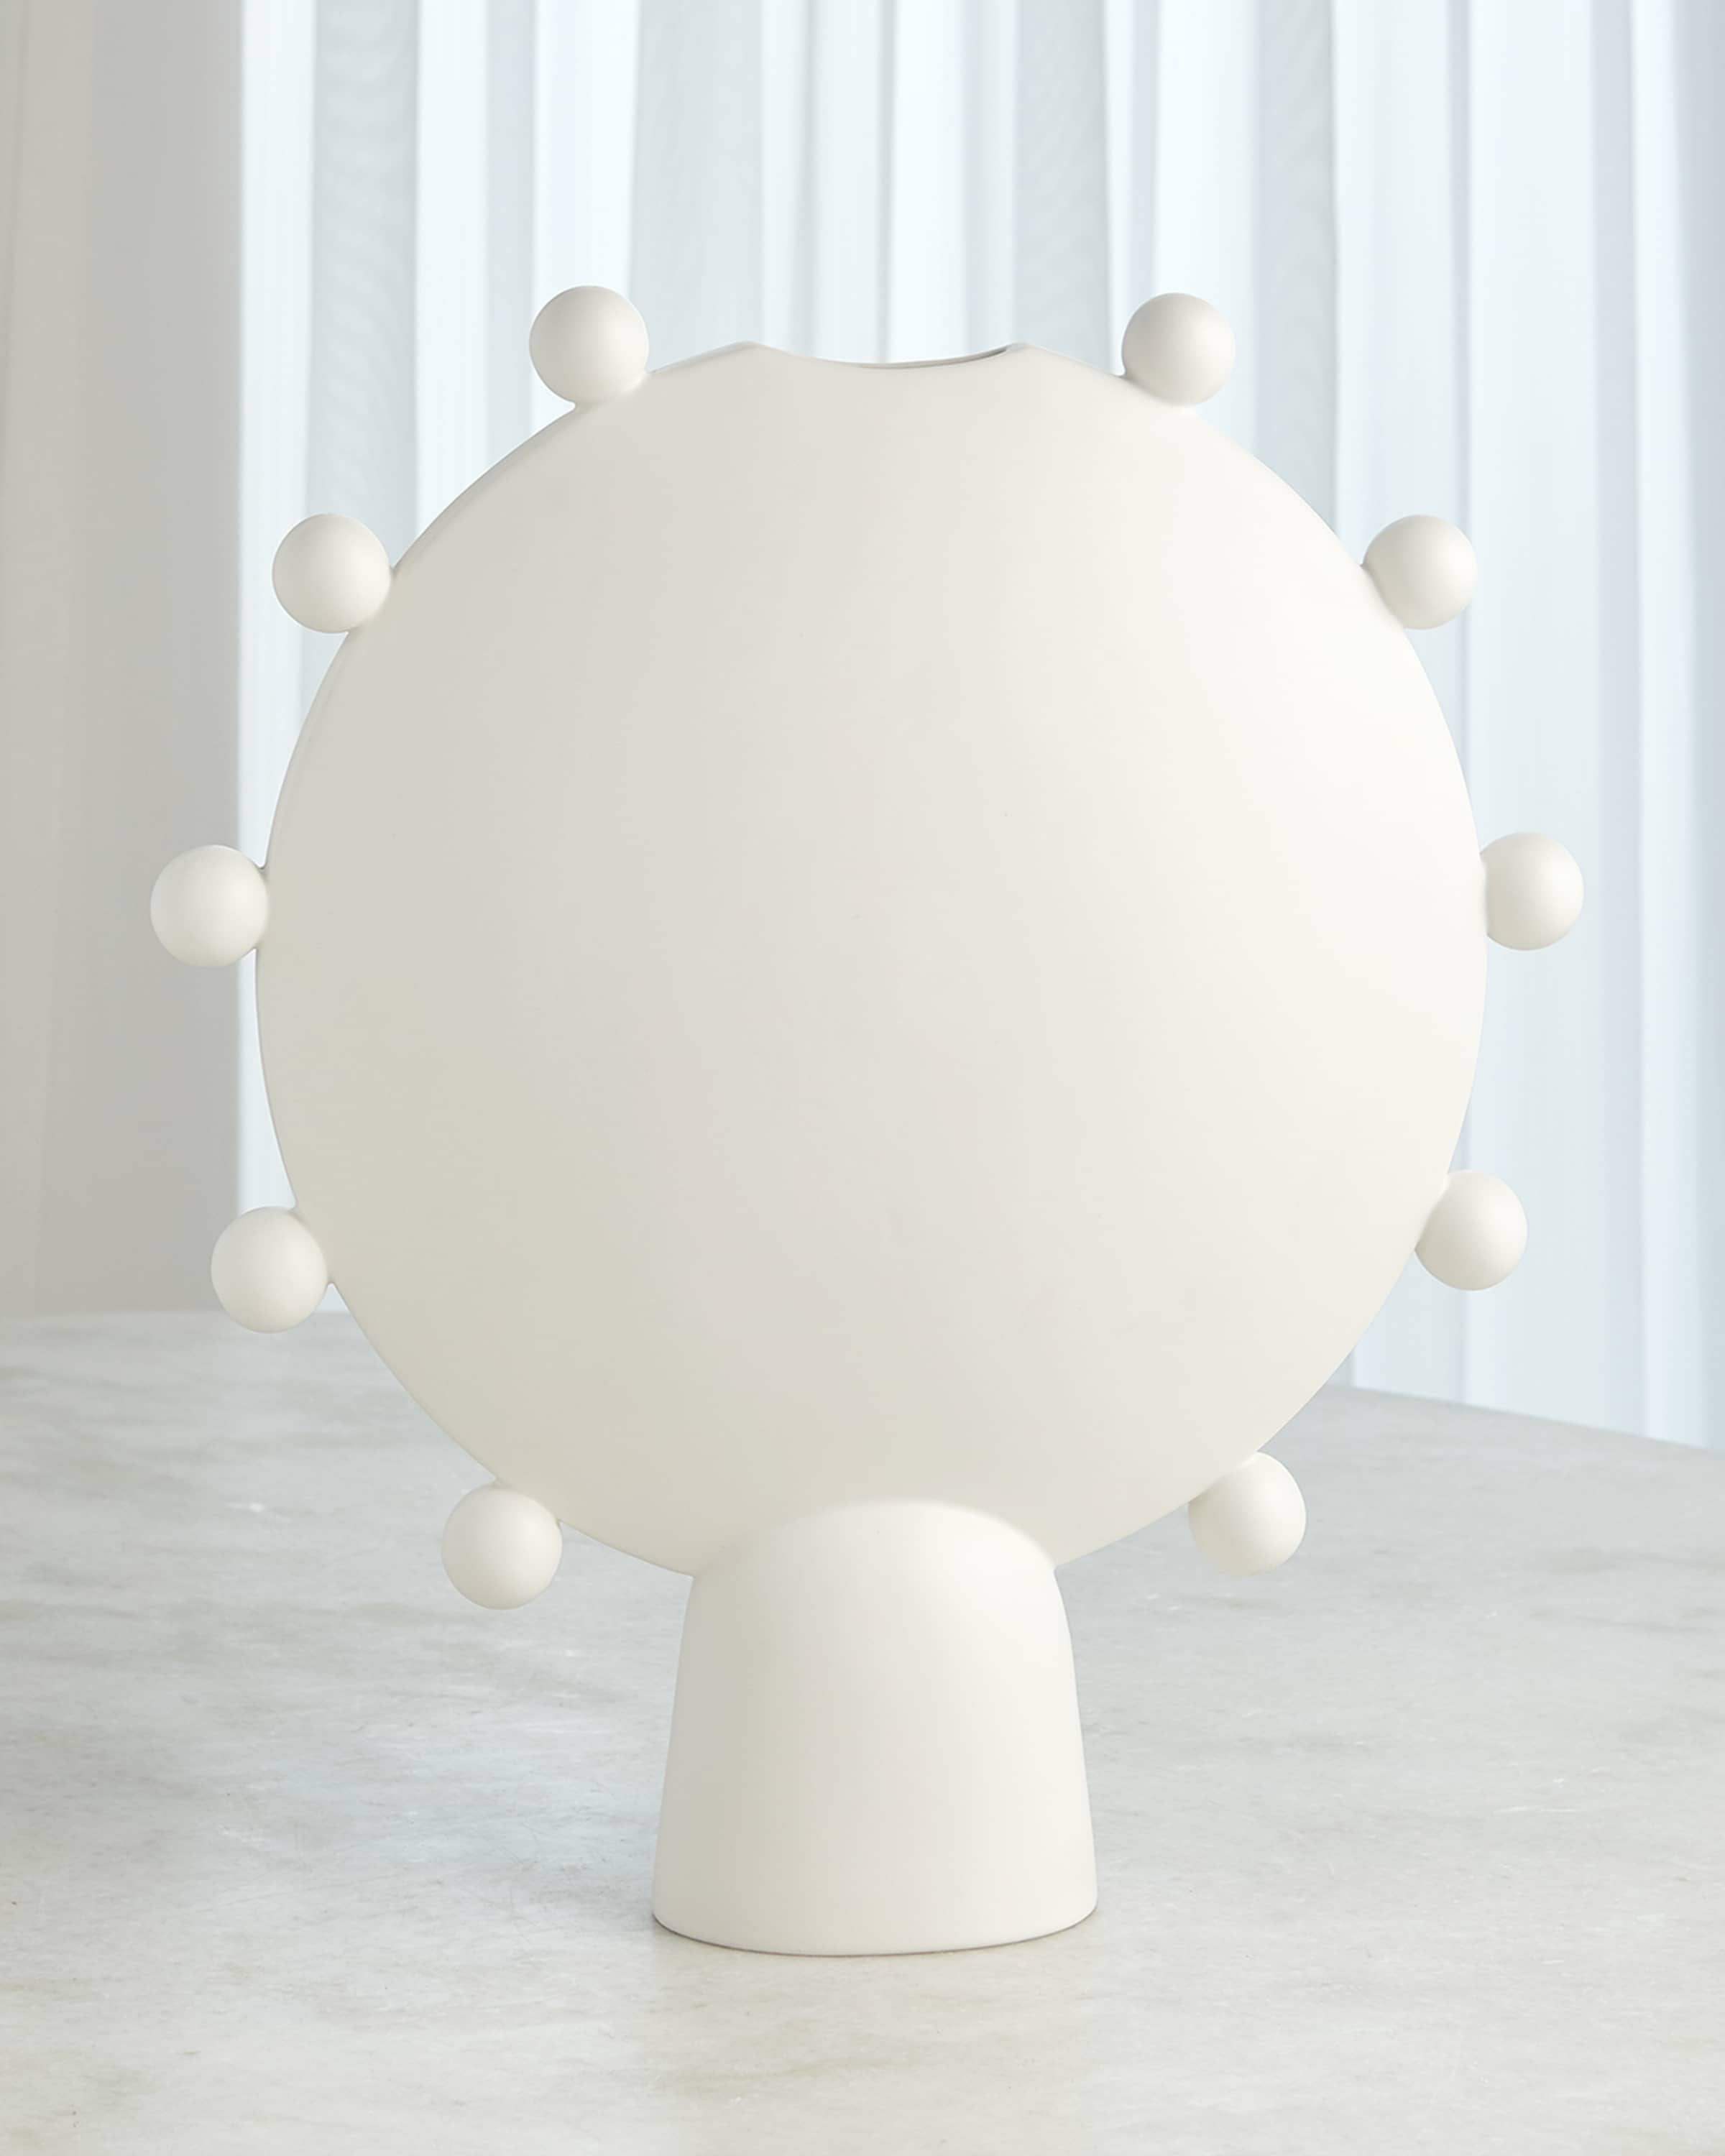 Ashley Childers for Global Views Spheres Collection White Vessel